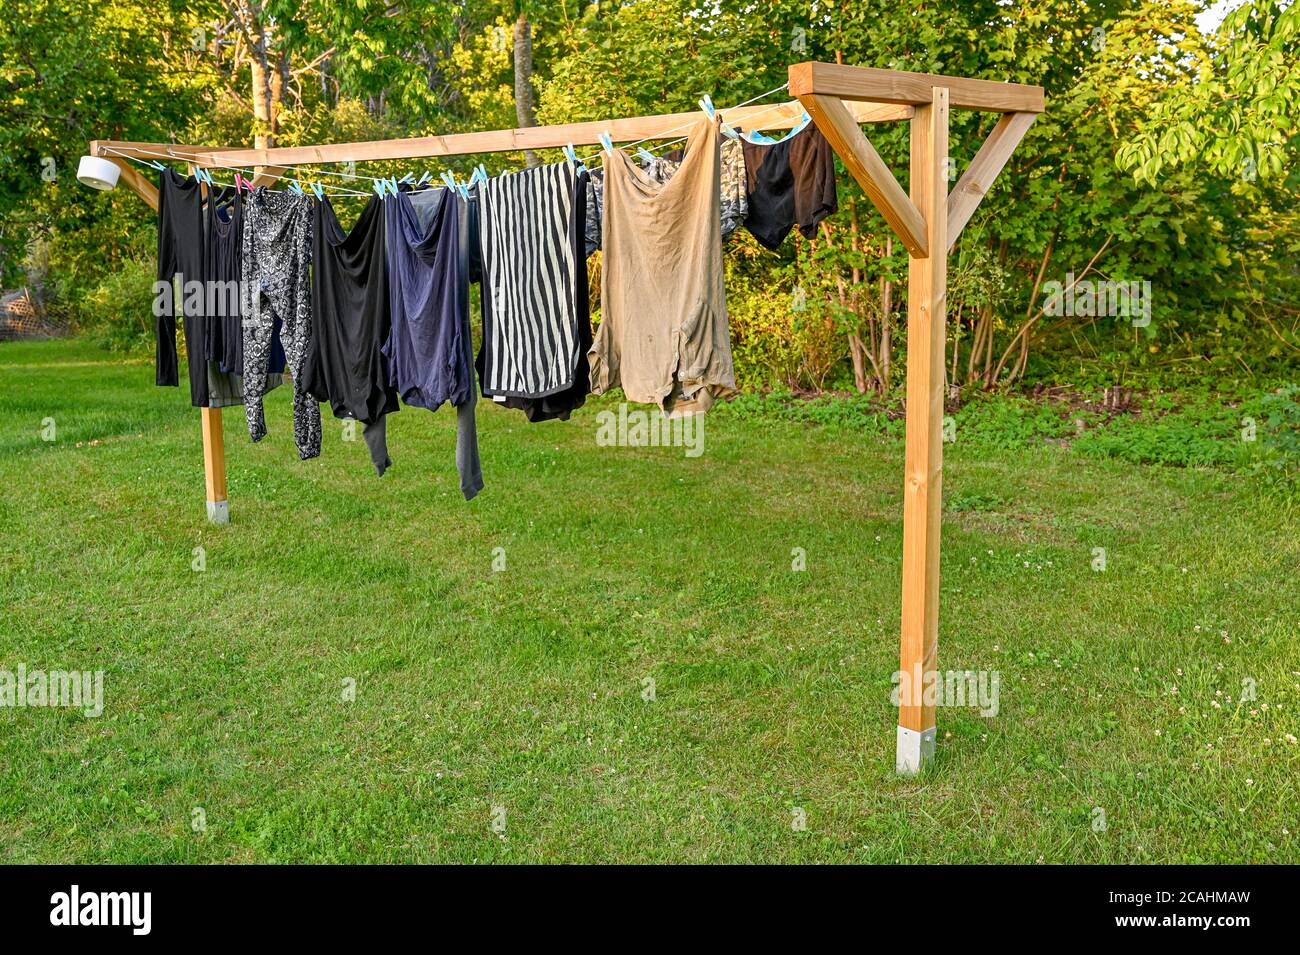 clothes hanging to dry on home made drying rack Stock Photo